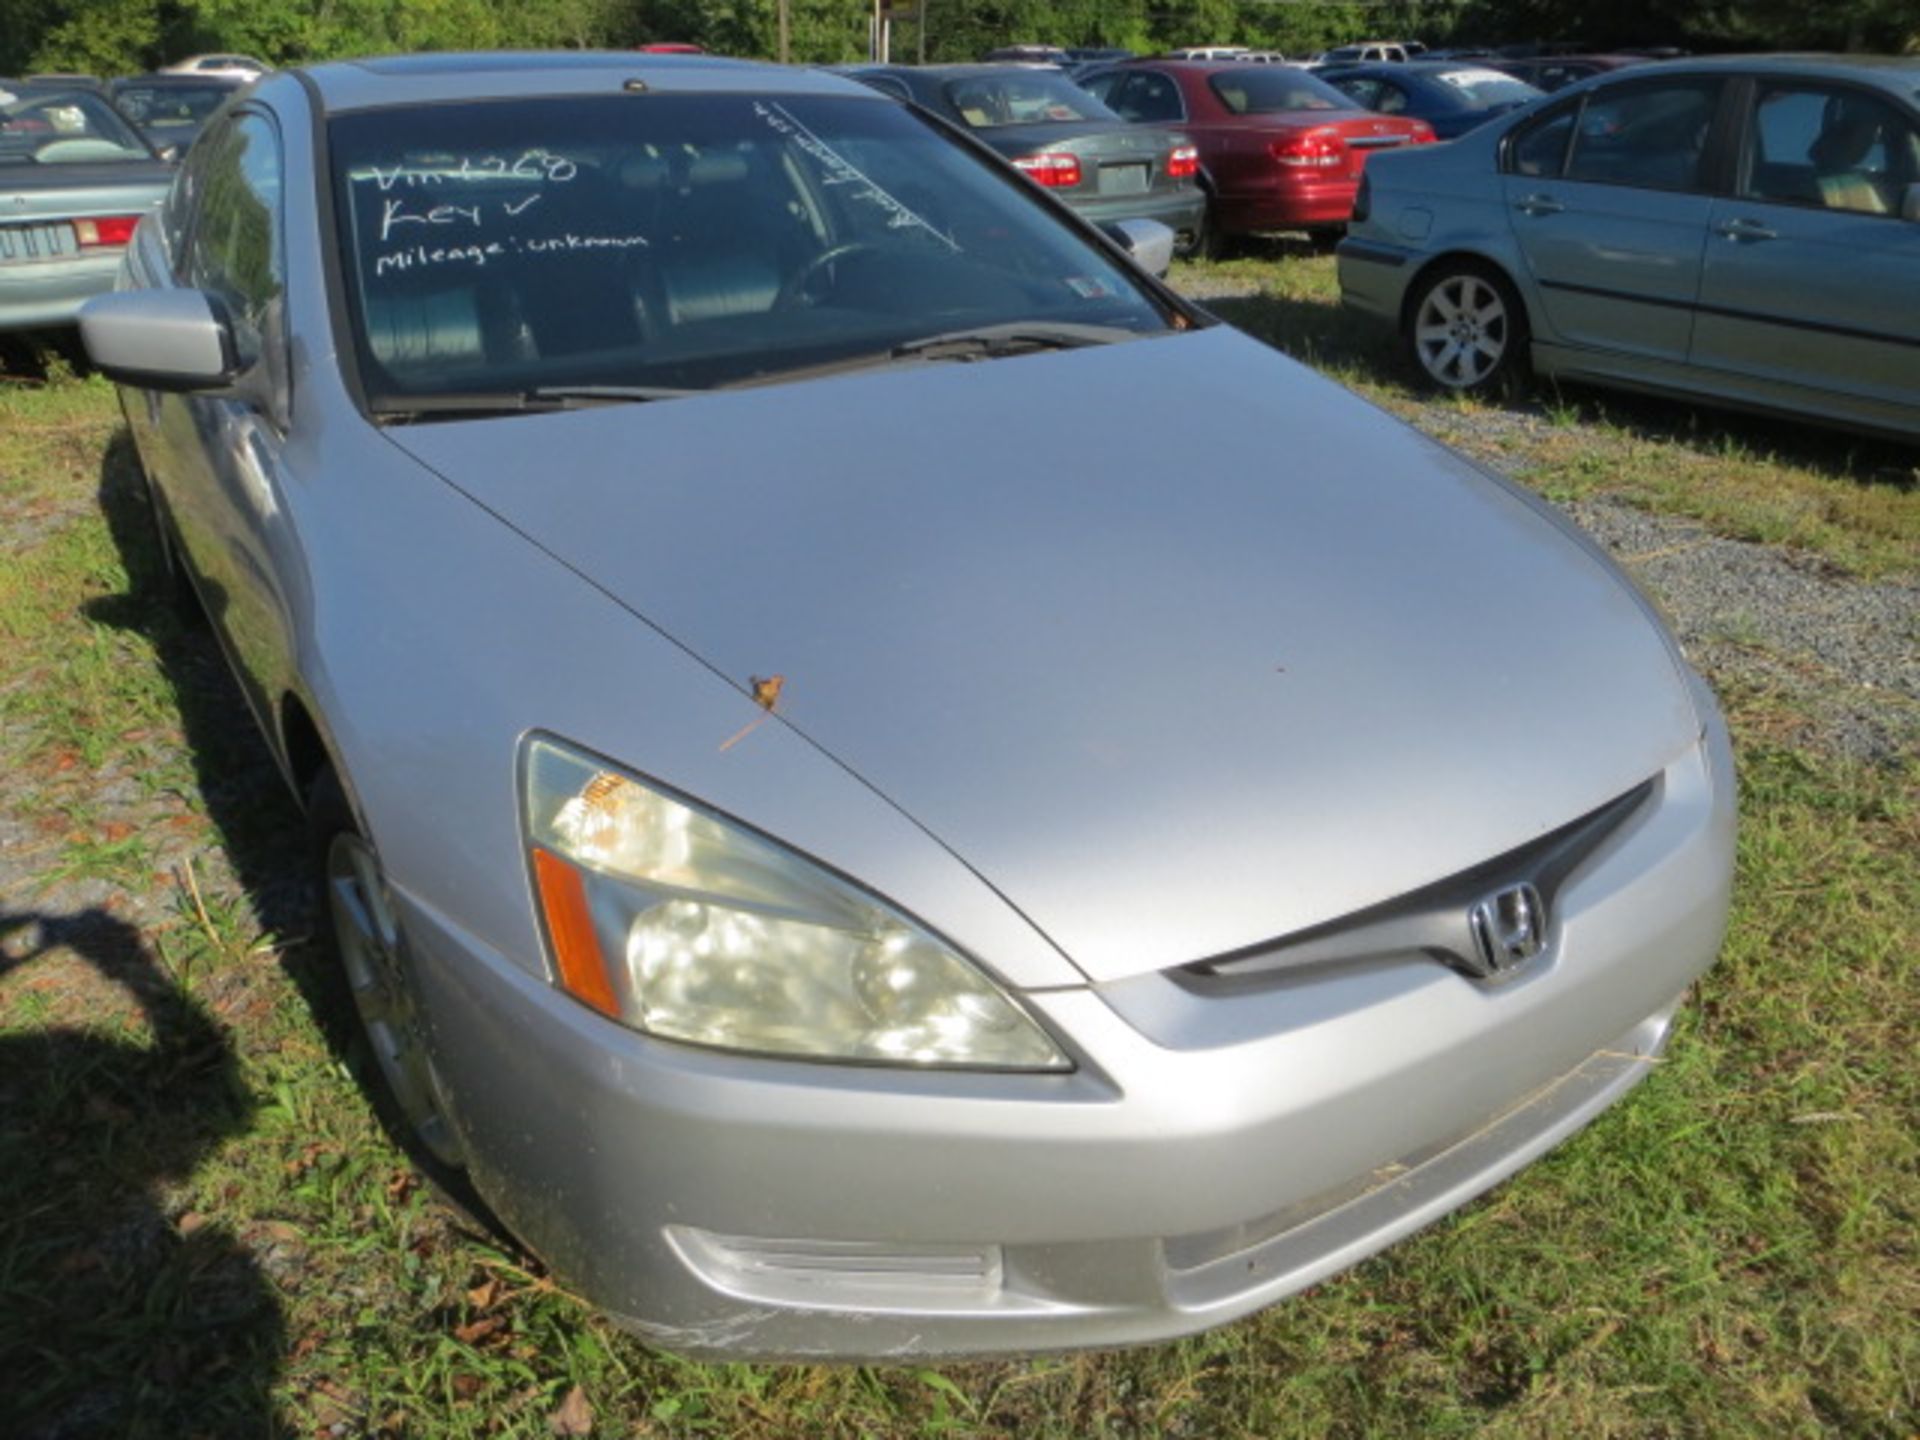 2003 Honda Accord-NEEDS TRANSMISSION UKNOWN MILES,VIN 1HGCM82663A016768, SOLD WITH GOOD TRANSFER